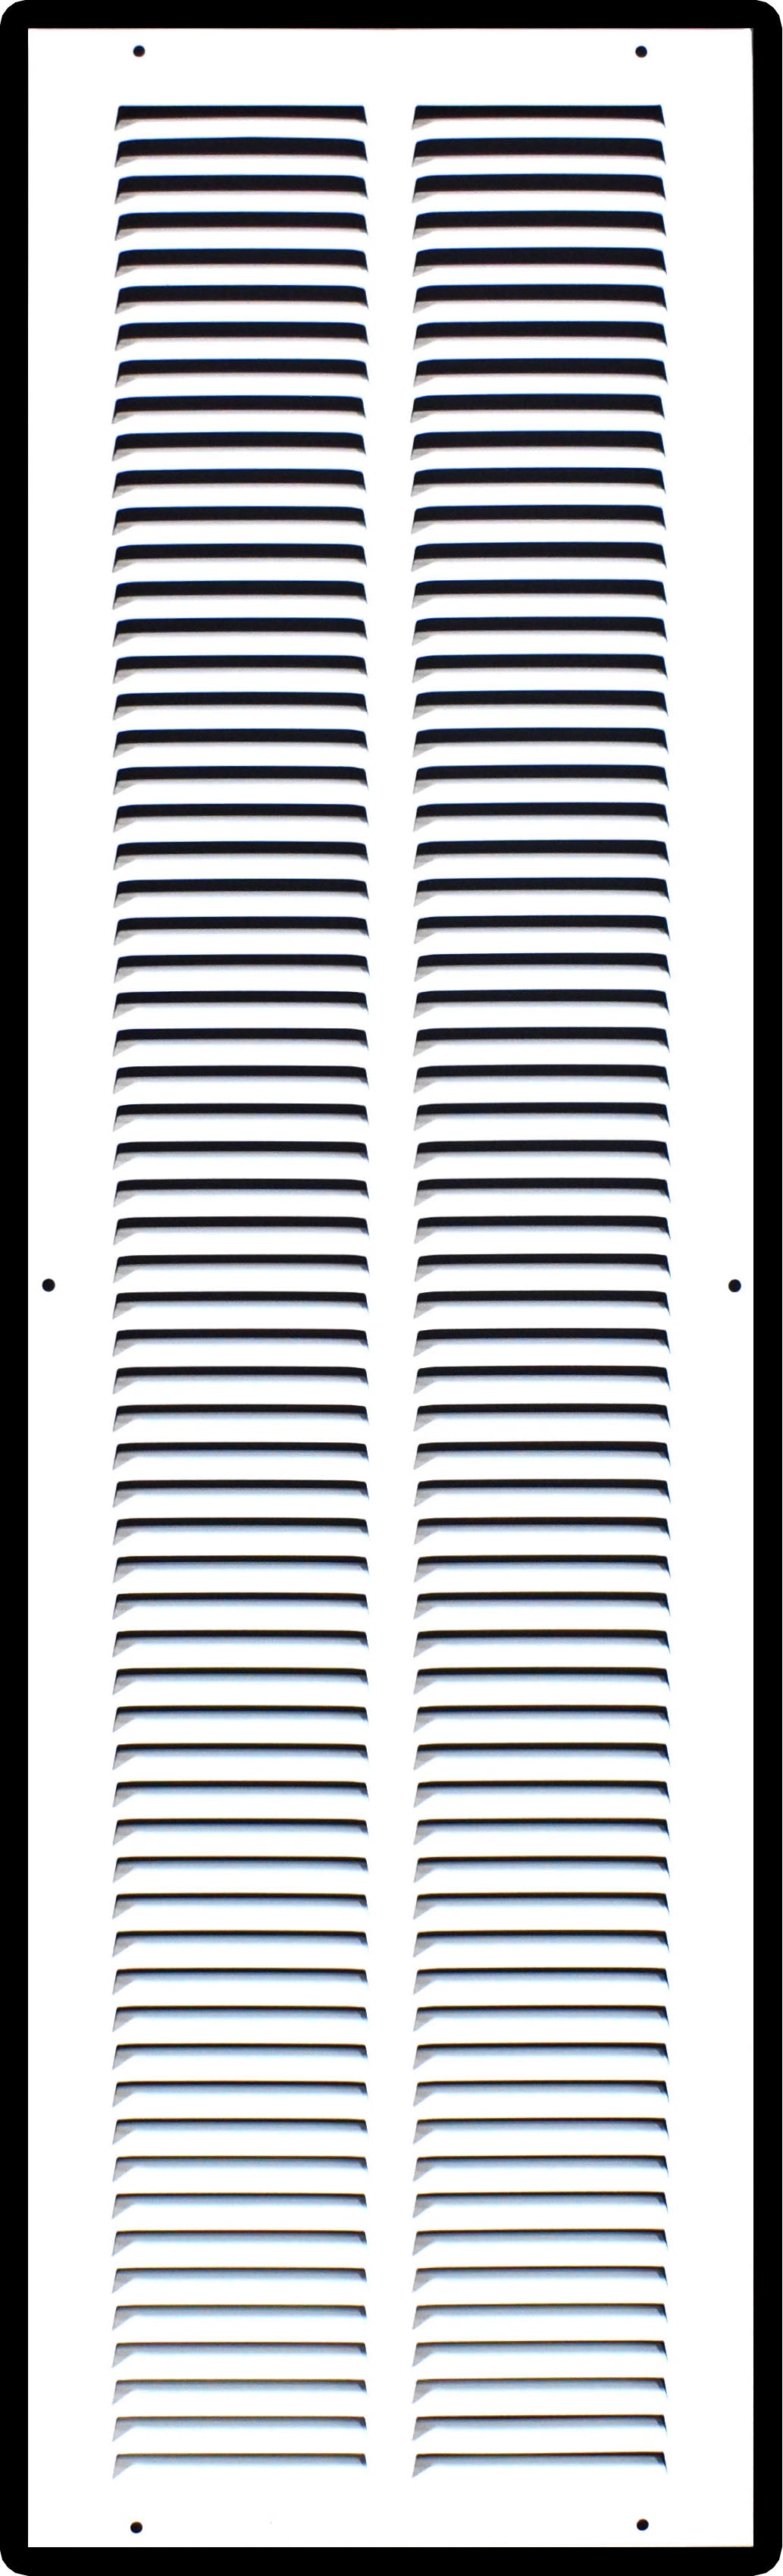 airgrilles 8" x 32" duct opening hd steel return air grille for sidewall and ceiling 7hnd-flt-rg-wh-8x32 038775640541 1